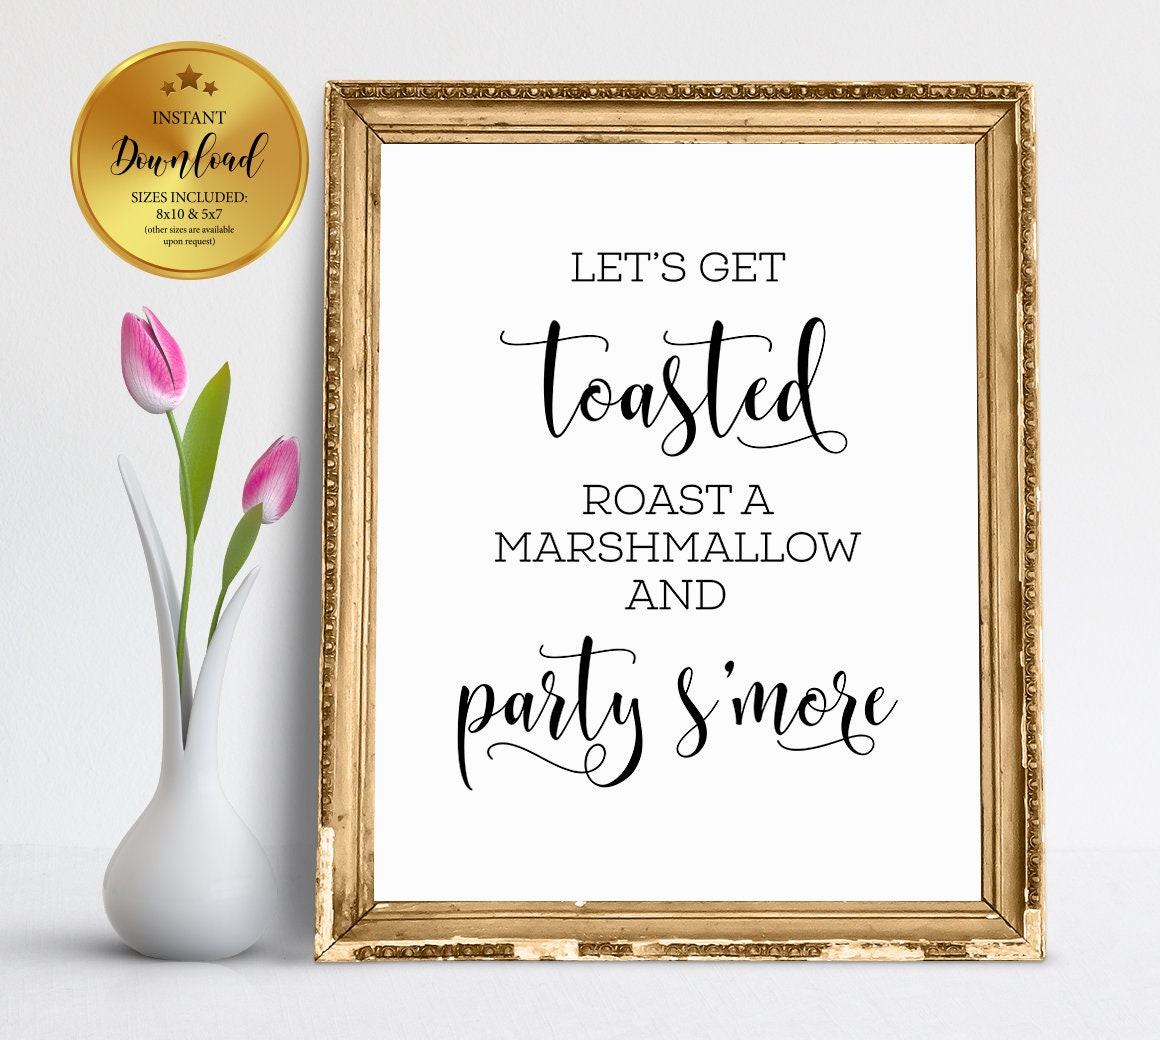 Smores Bar Sign Printable Let/'s Get Toasted Roast A Marshmallow And Party S/'more Wedding Signs Wedding Sayings Wedding Smores Sign